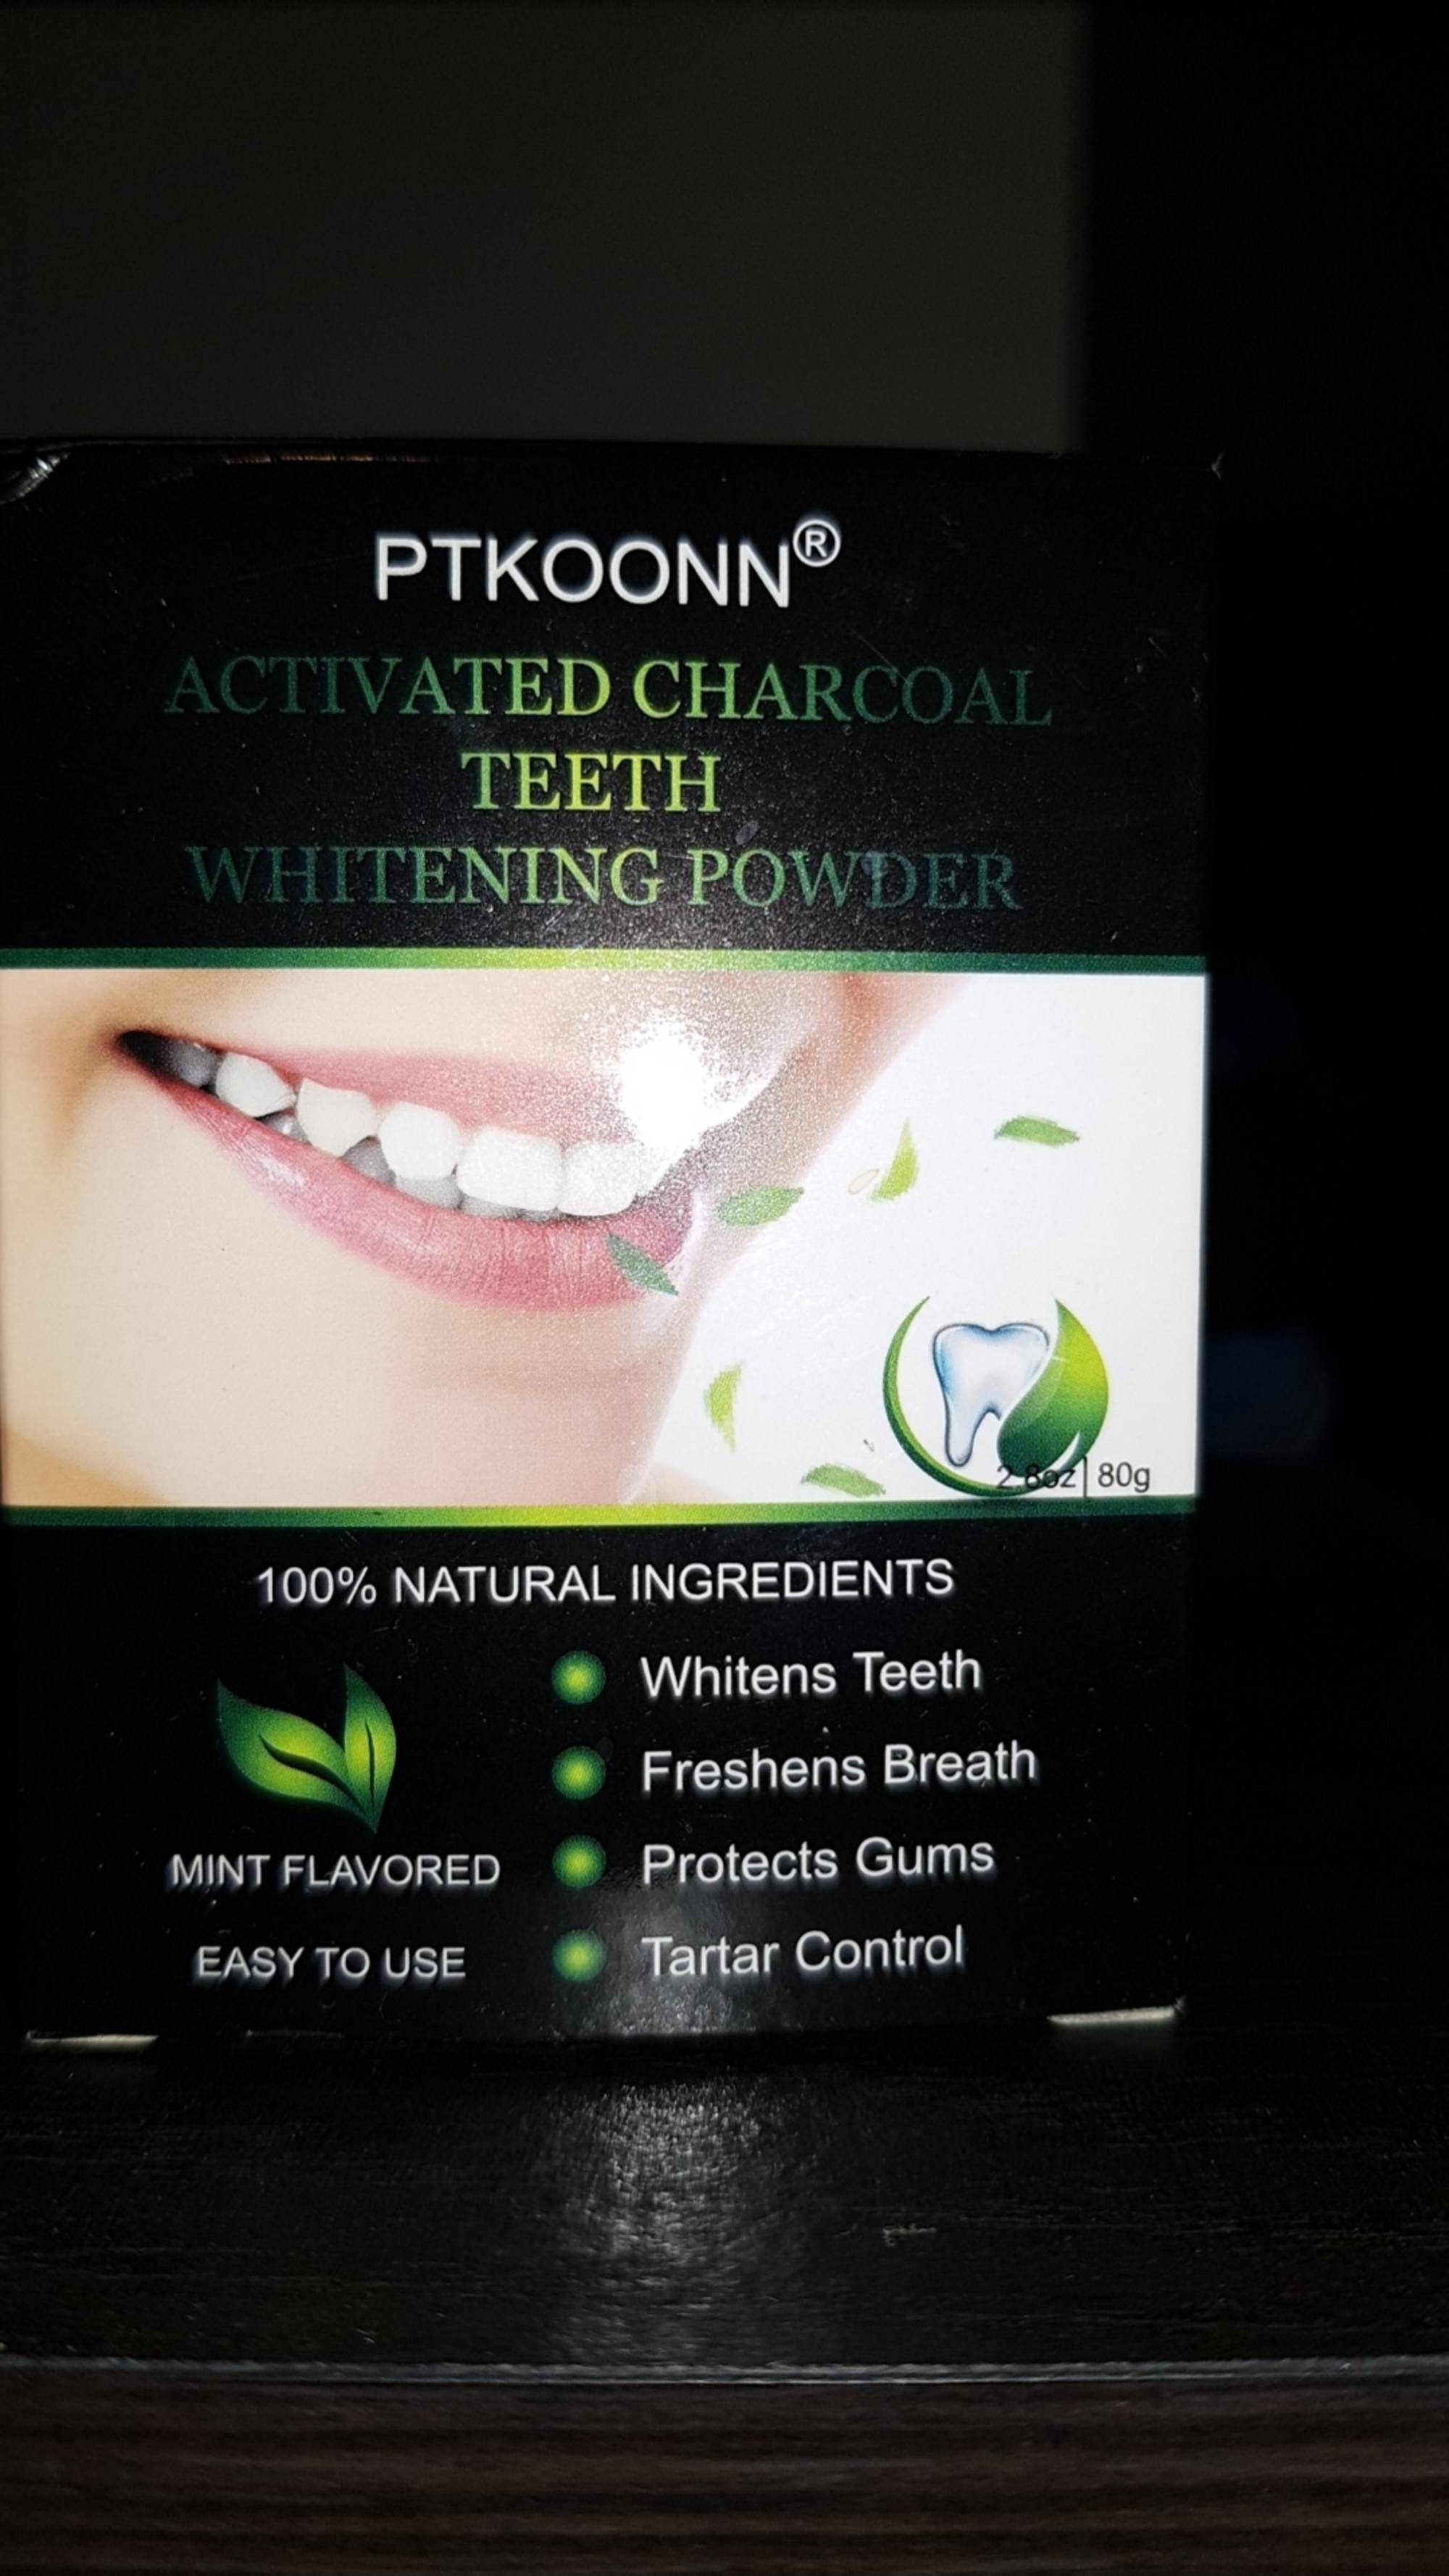 PTKOONN - Activated charcoal teeth - Whitening powder